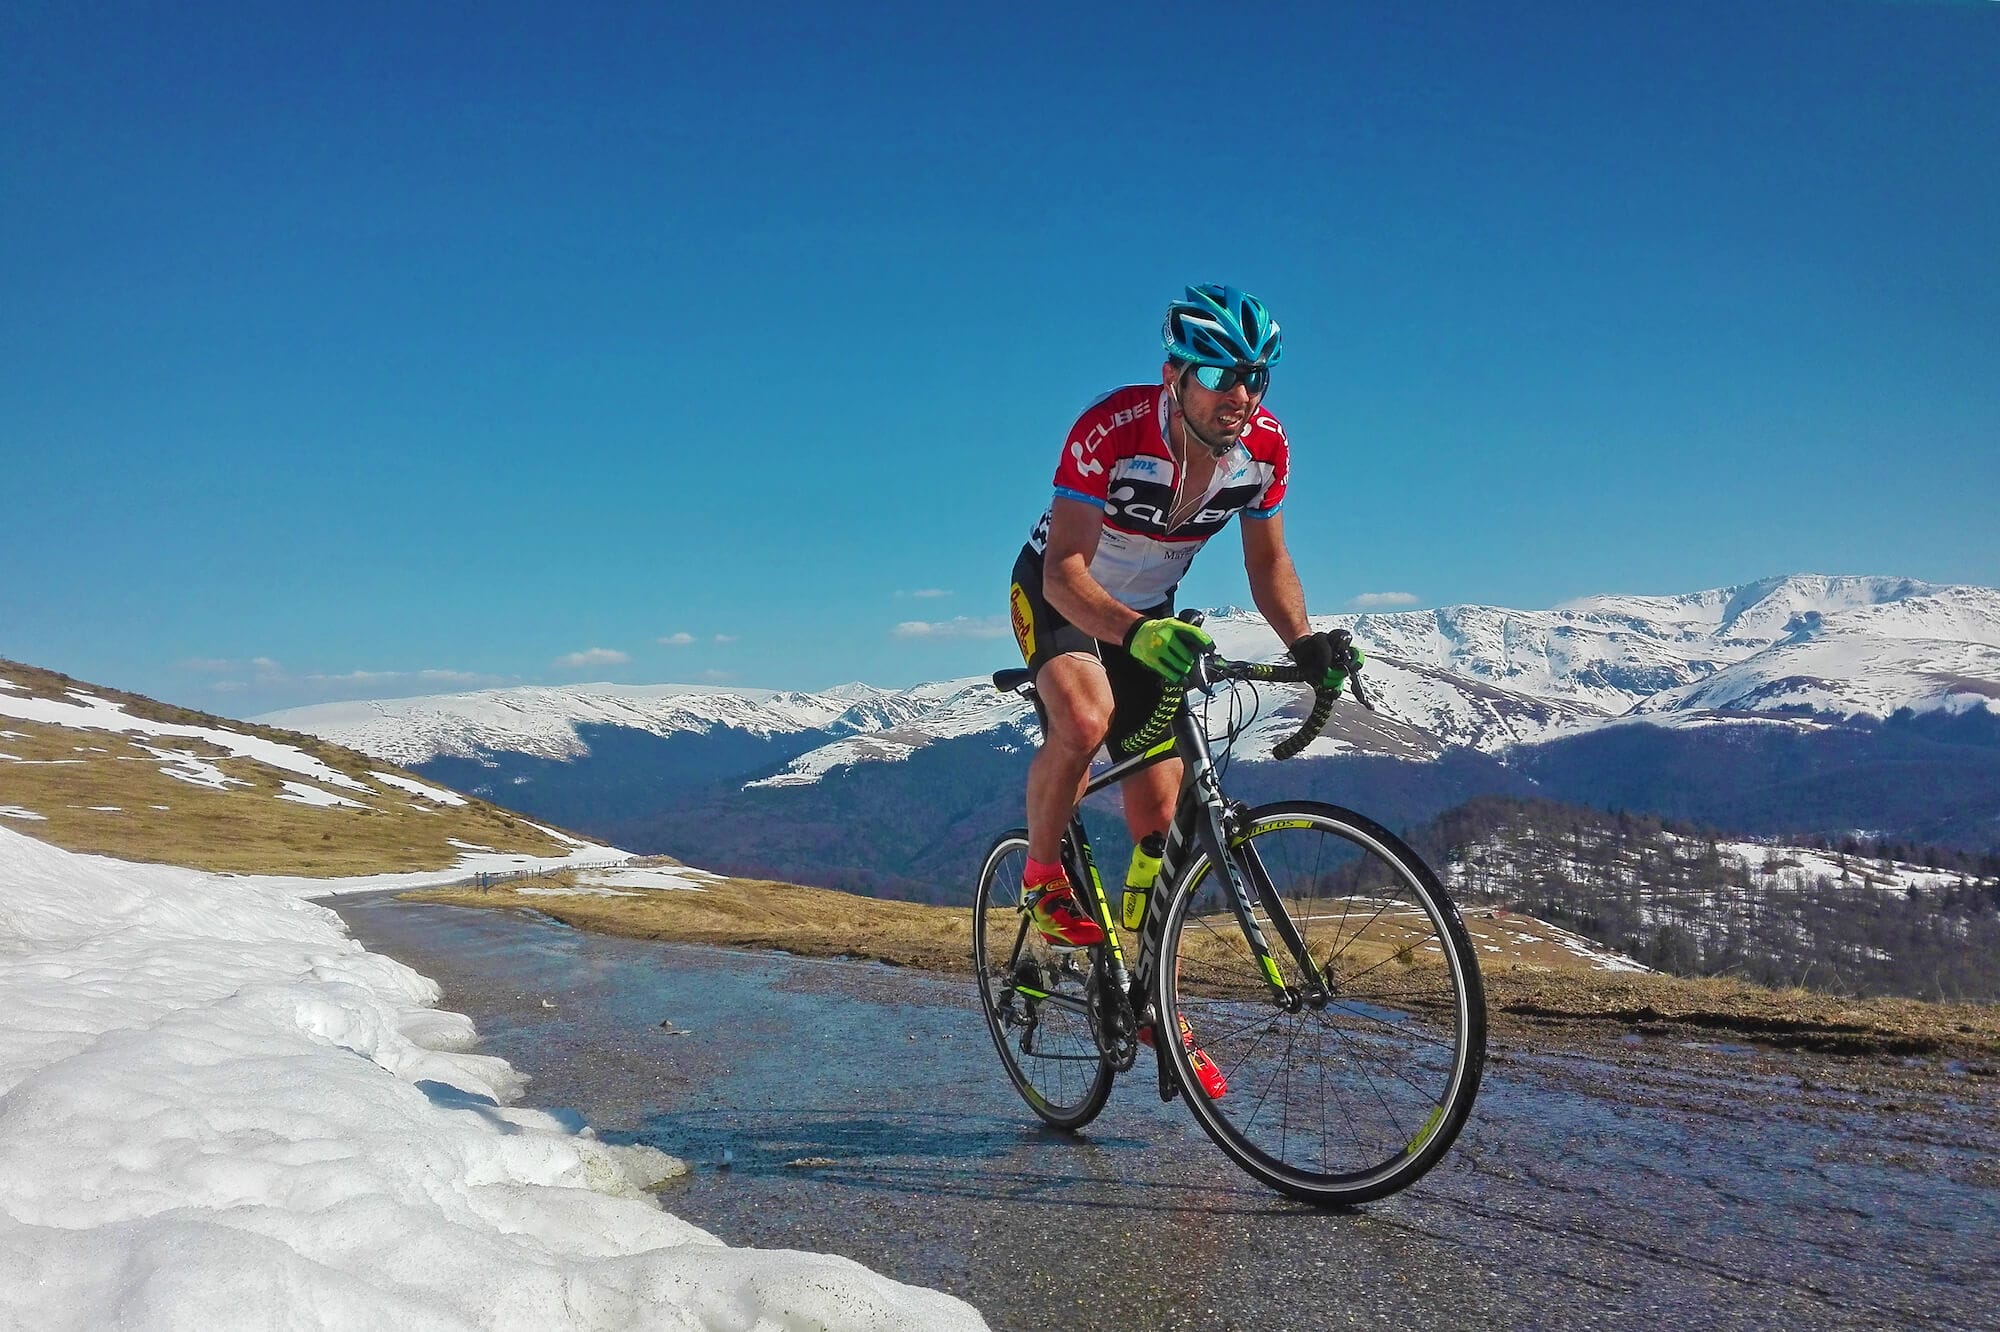 Many endurance athletes train at high altitudes to improve their performance at sea level.